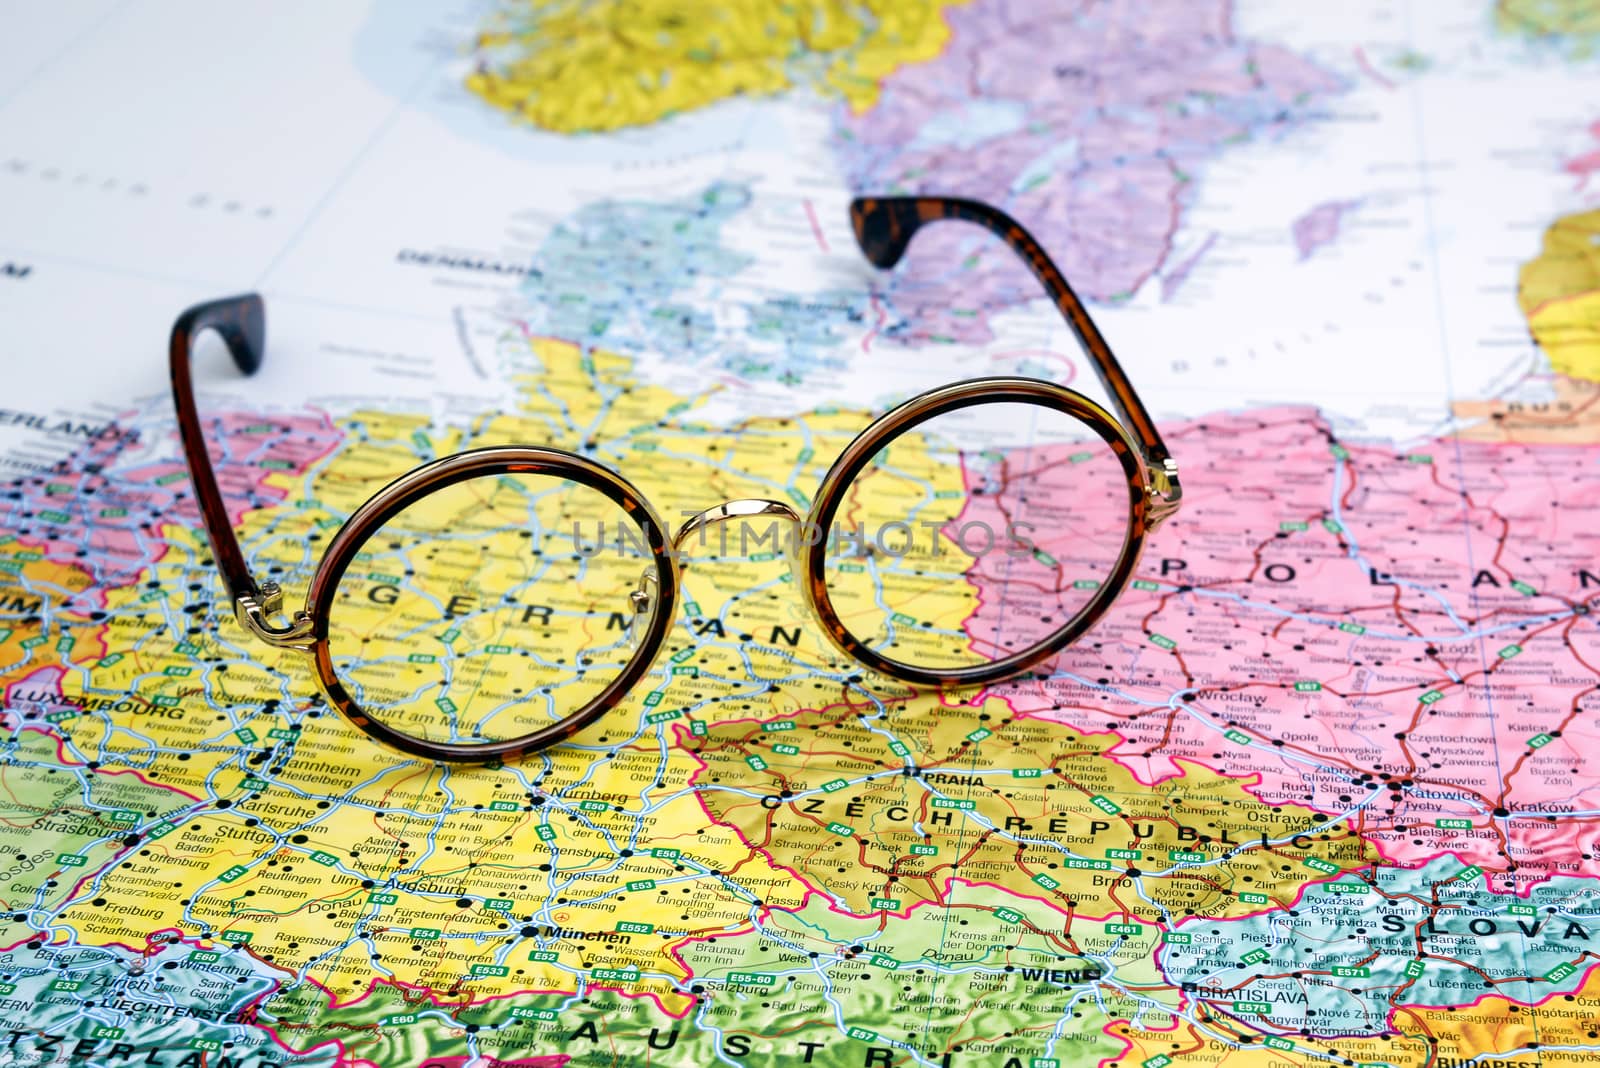 Glasses on a map of europe - Germany by dk_photos